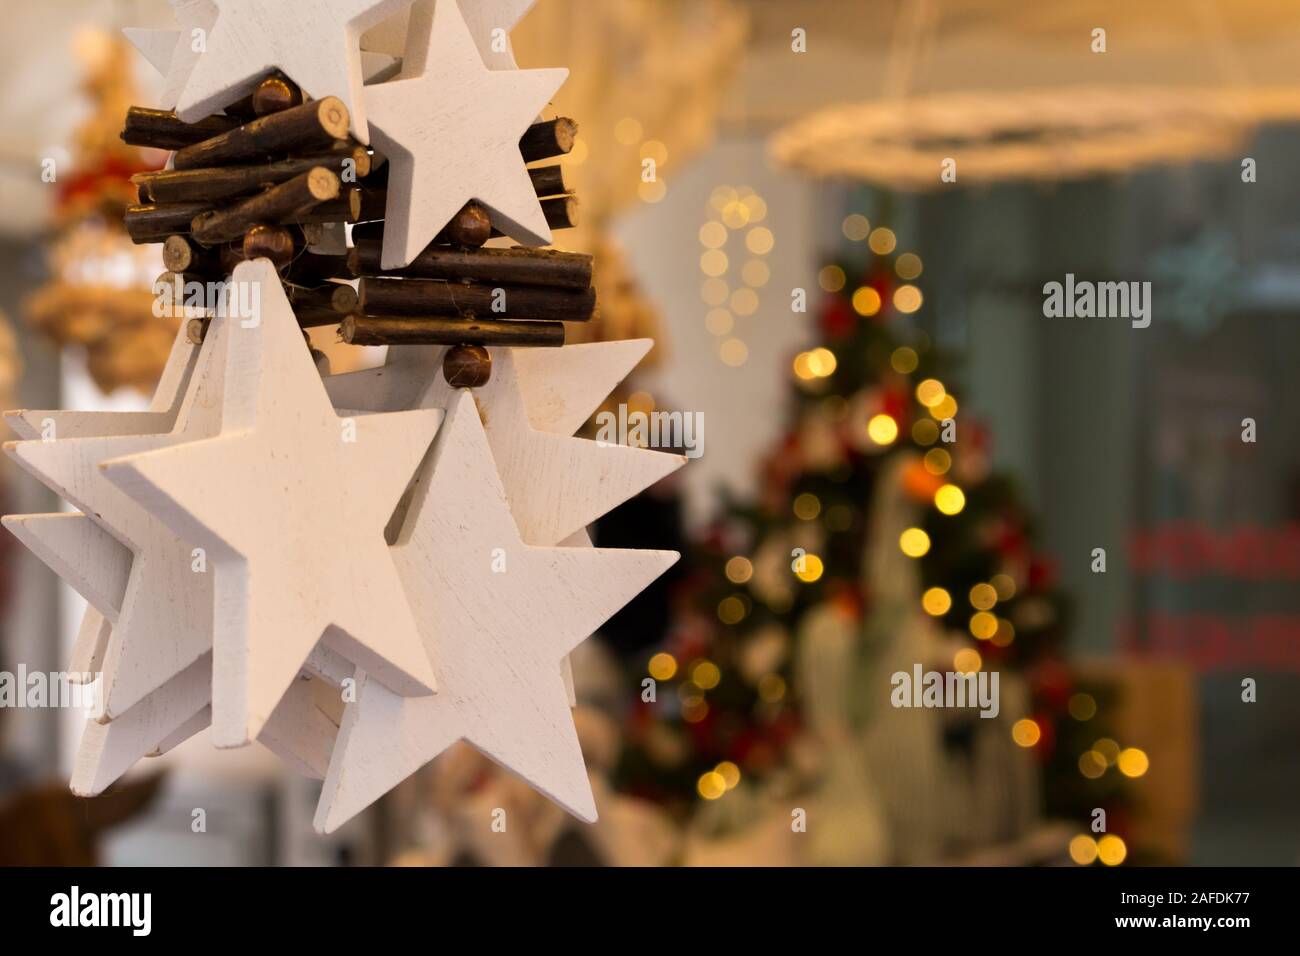 Christmas Decoration With Stars Hanging From The Ceiling And